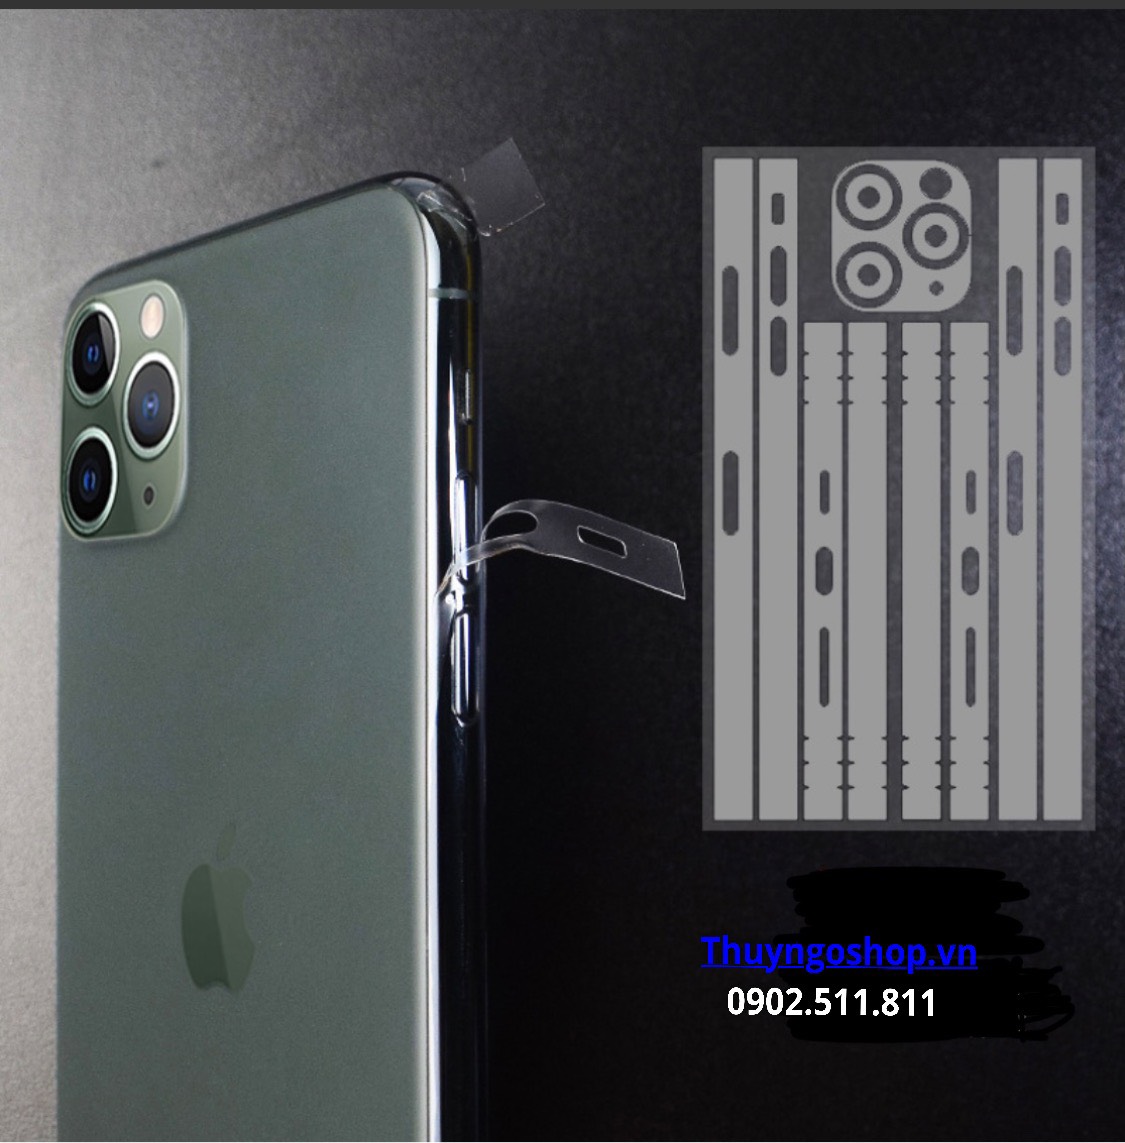 PPF 4 cạnh viền trong suốt / mờ Iphone XR